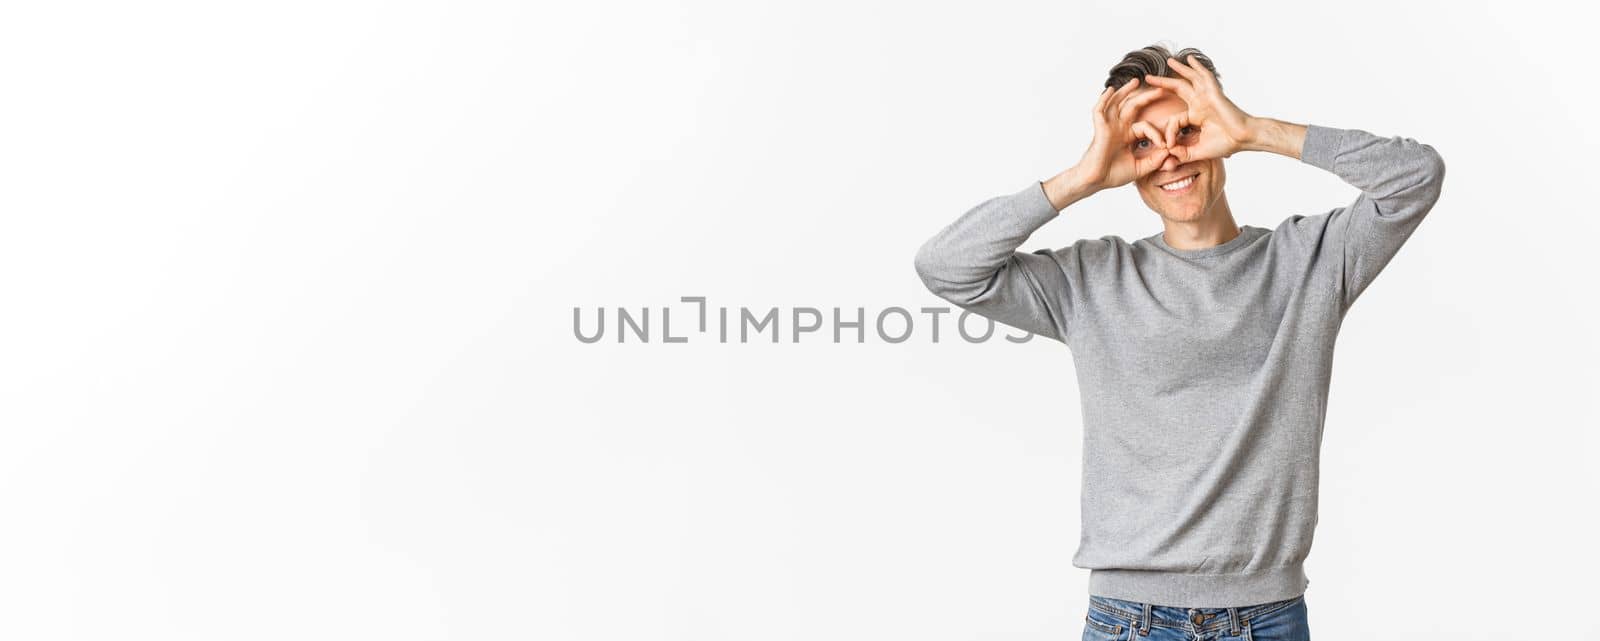 Portrait of funny middle-aged guy making faces, showing hand glasses around eyes as if looking through binoculars, standing over white background.